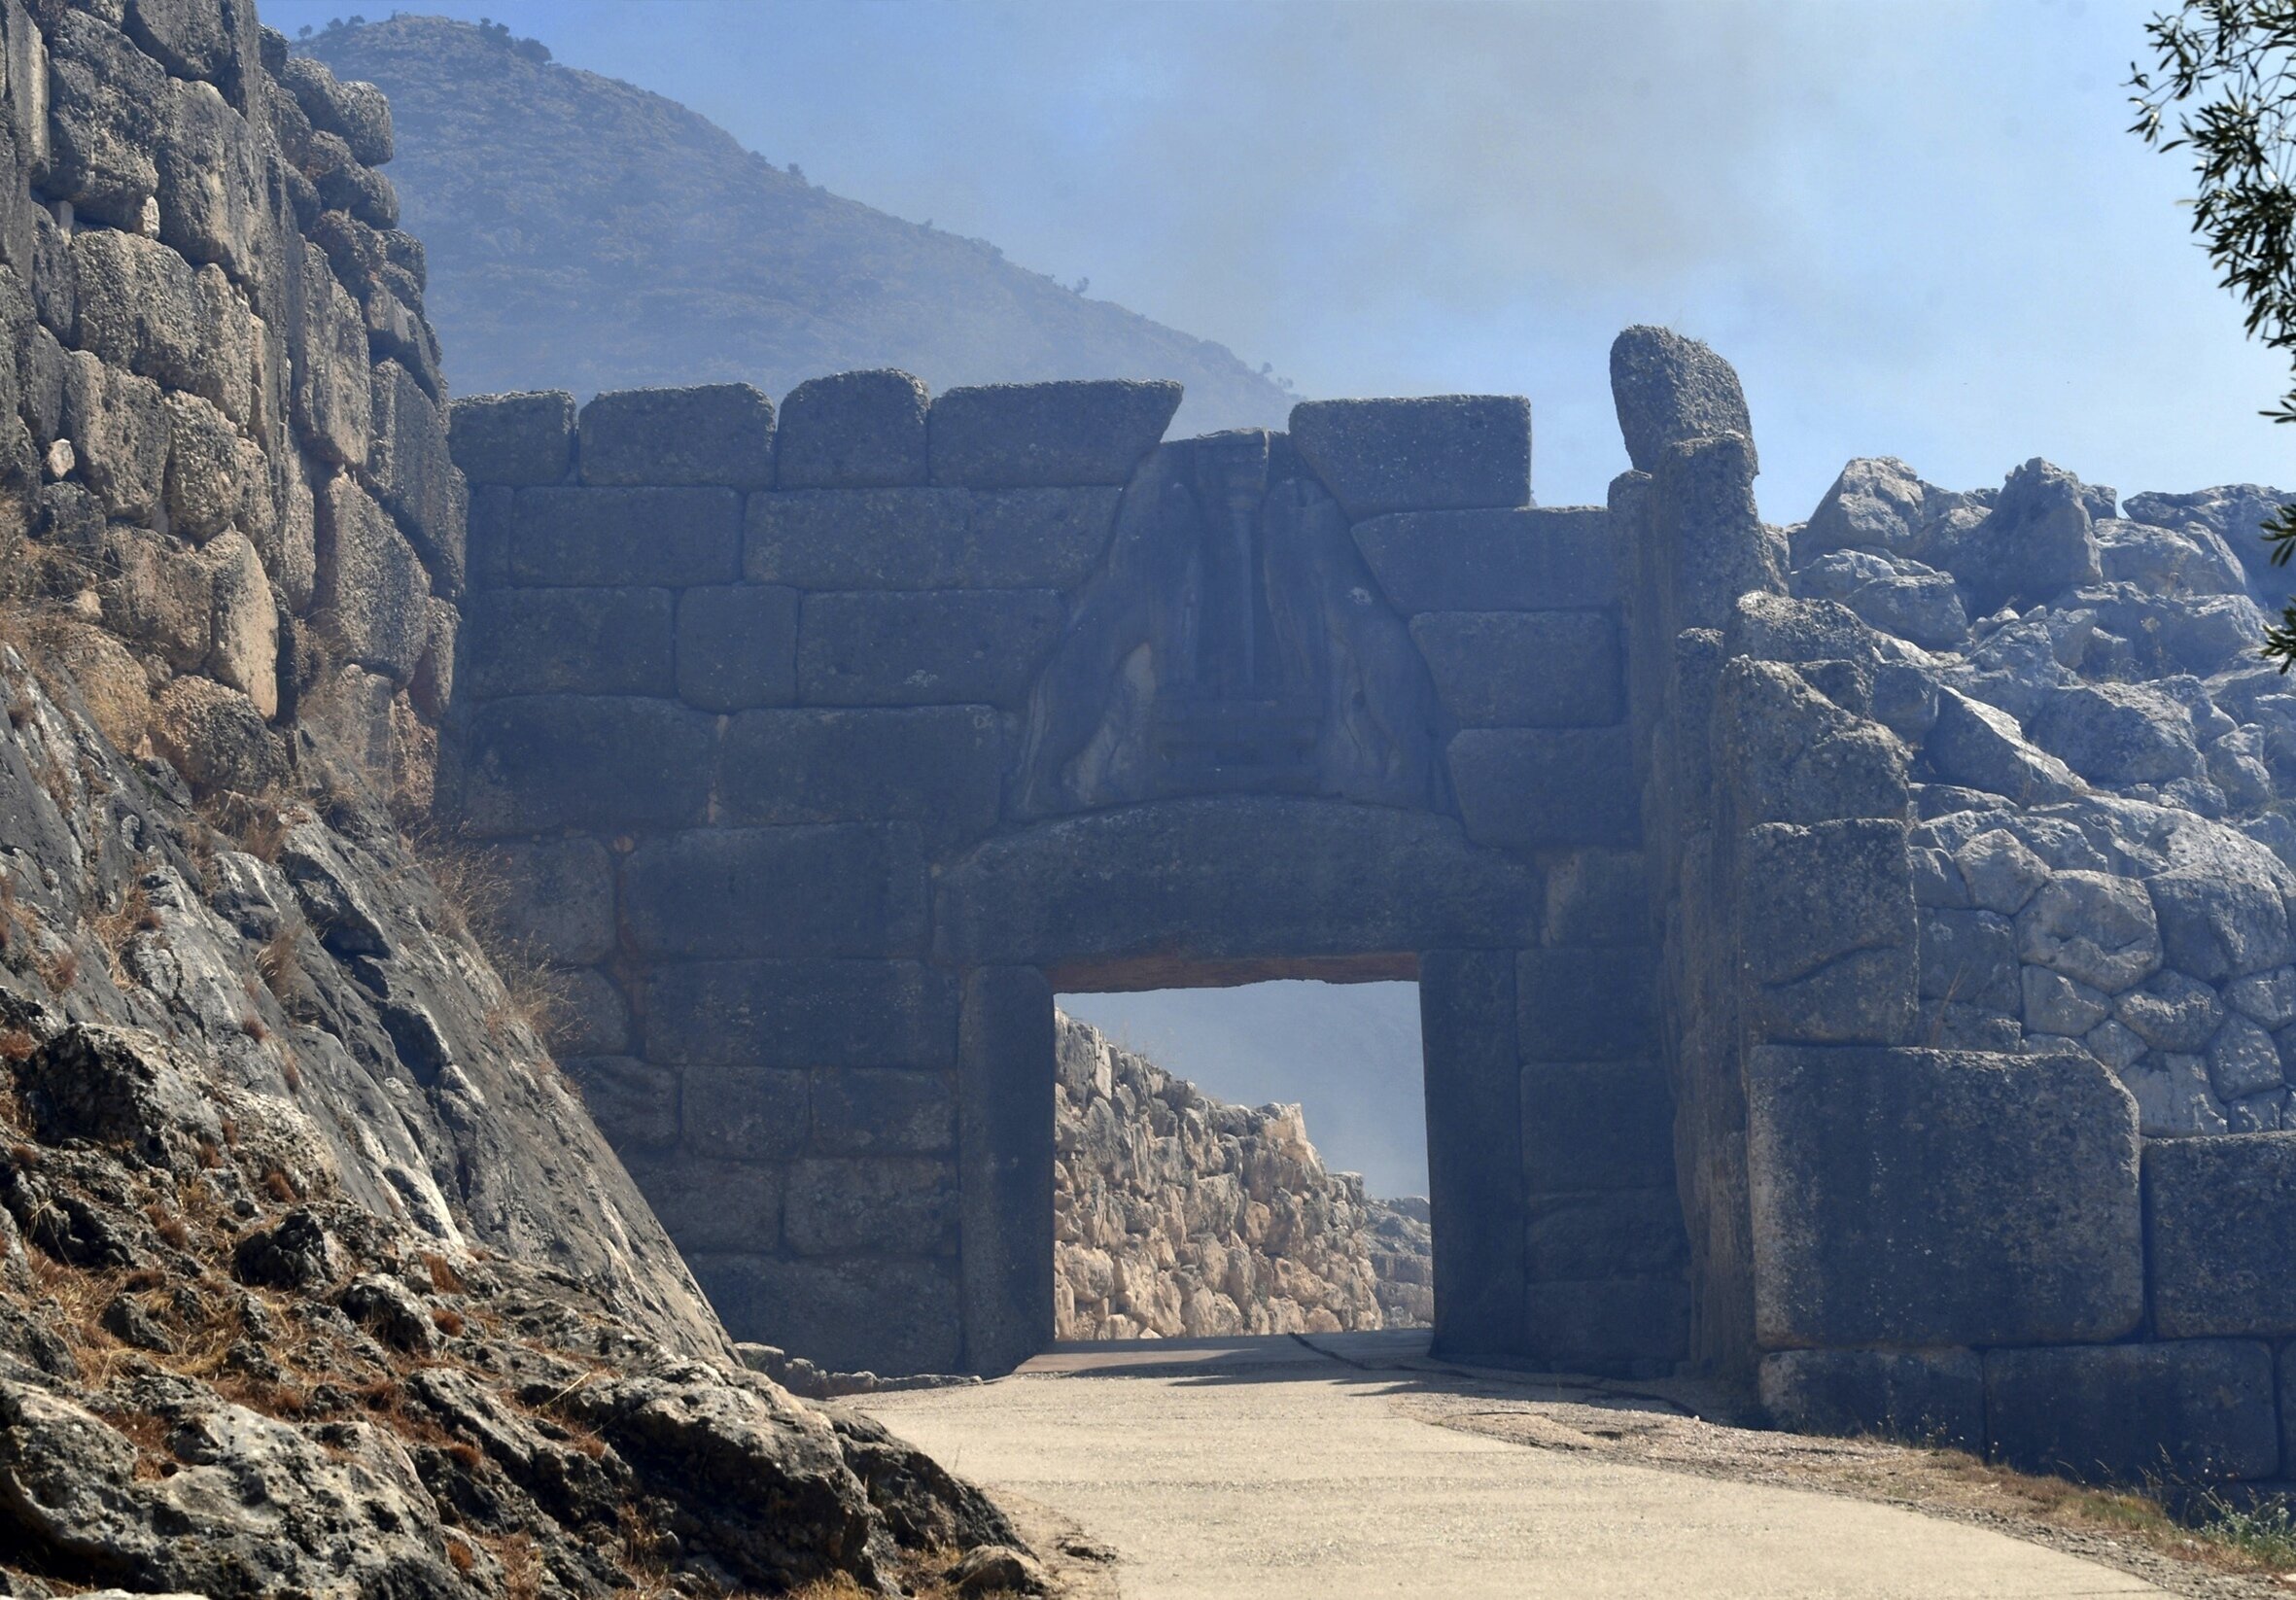 The Citadel of Mycenae  History and Archaeology Online